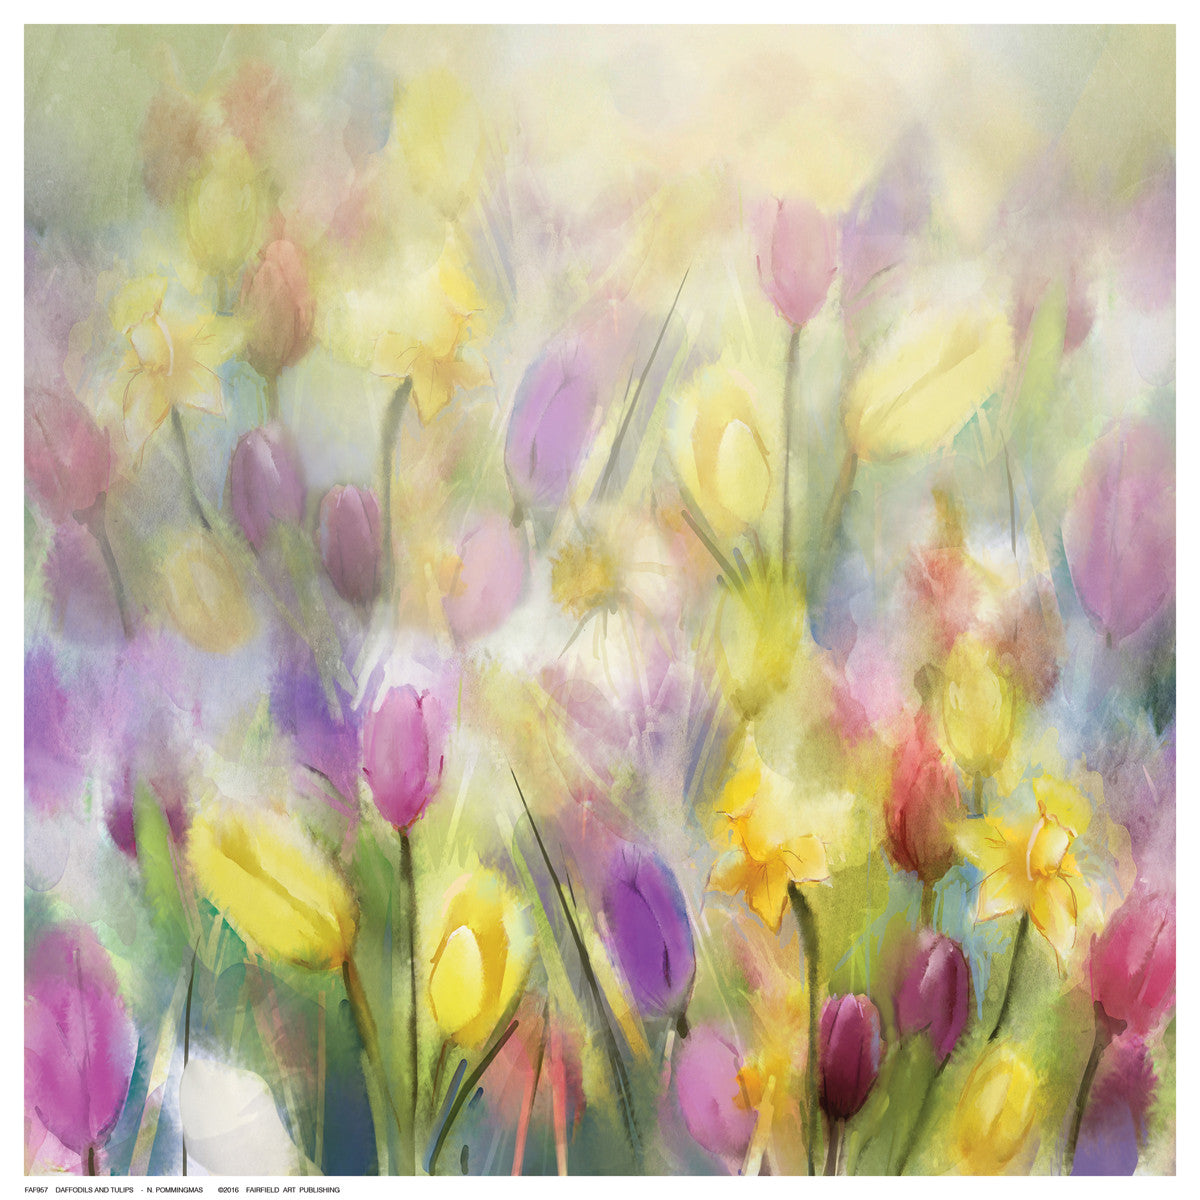 Daffodils and Tulips by N. Pommingmas - FairField Art Publishing